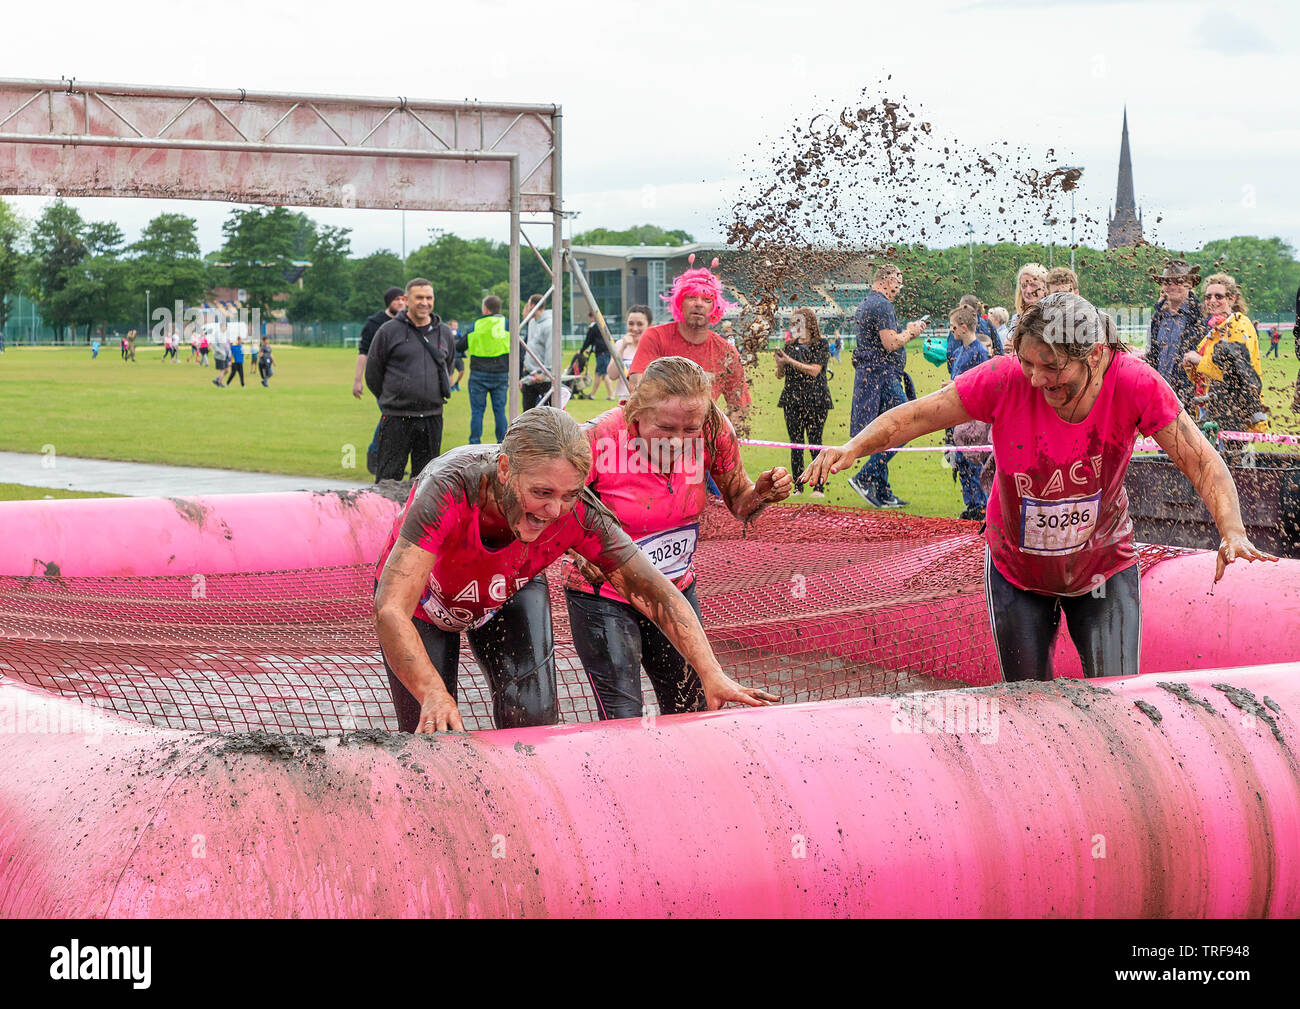 5K run, obstacle course to get Ohio women pretty muddy – The Lantern